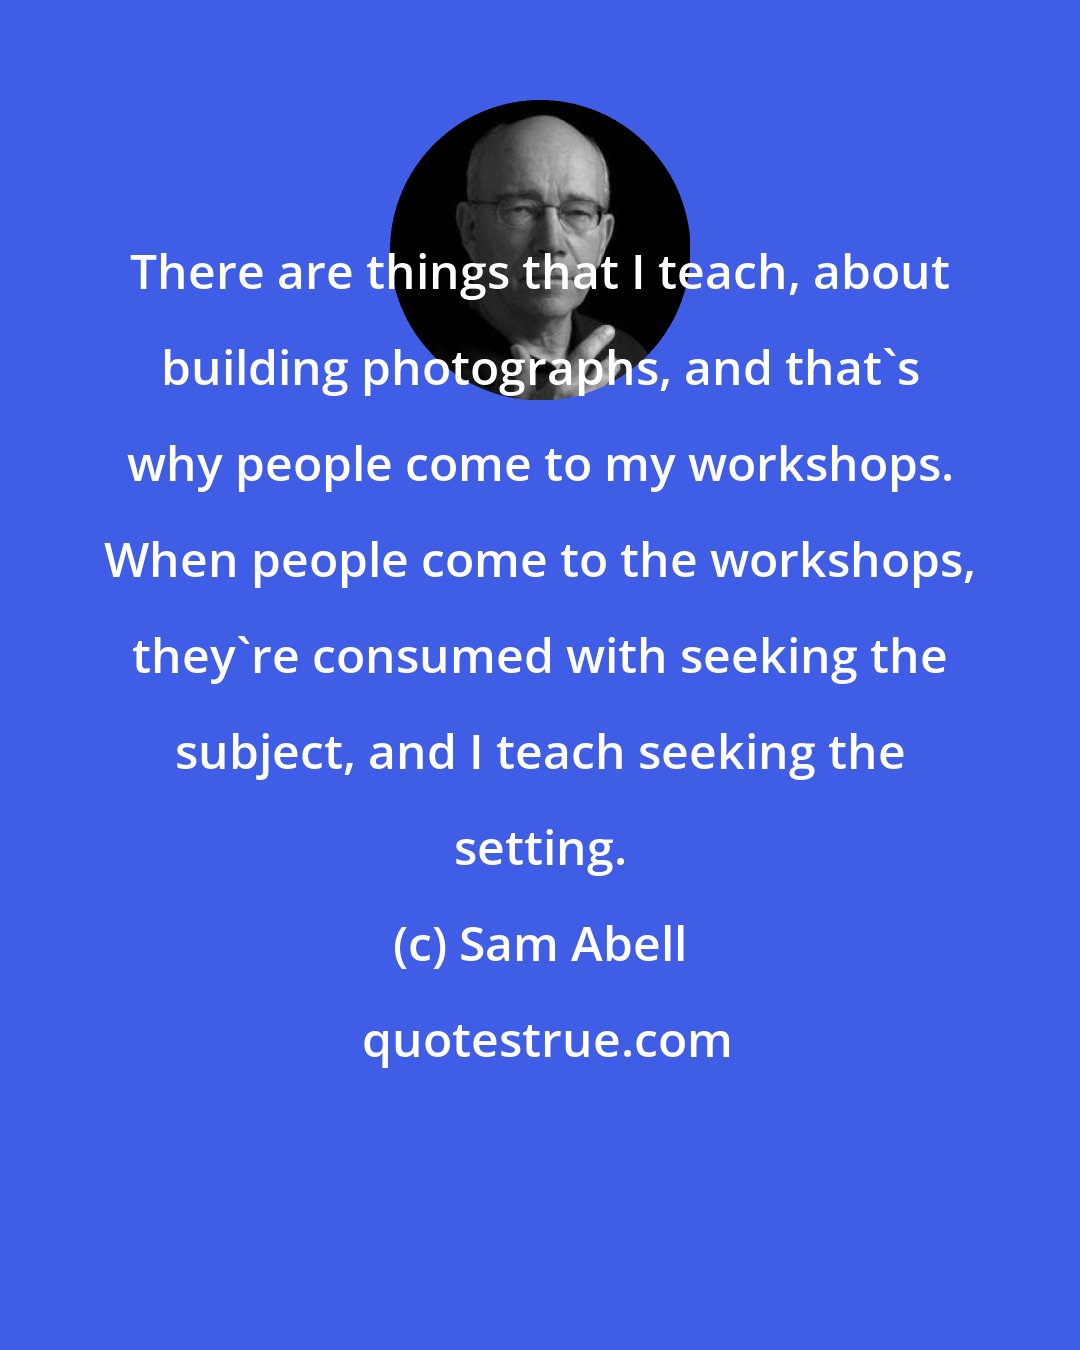 Sam Abell: There are things that I teach, about building photographs, and that's why people come to my workshops. When people come to the workshops, they're consumed with seeking the subject, and I teach seeking the setting.